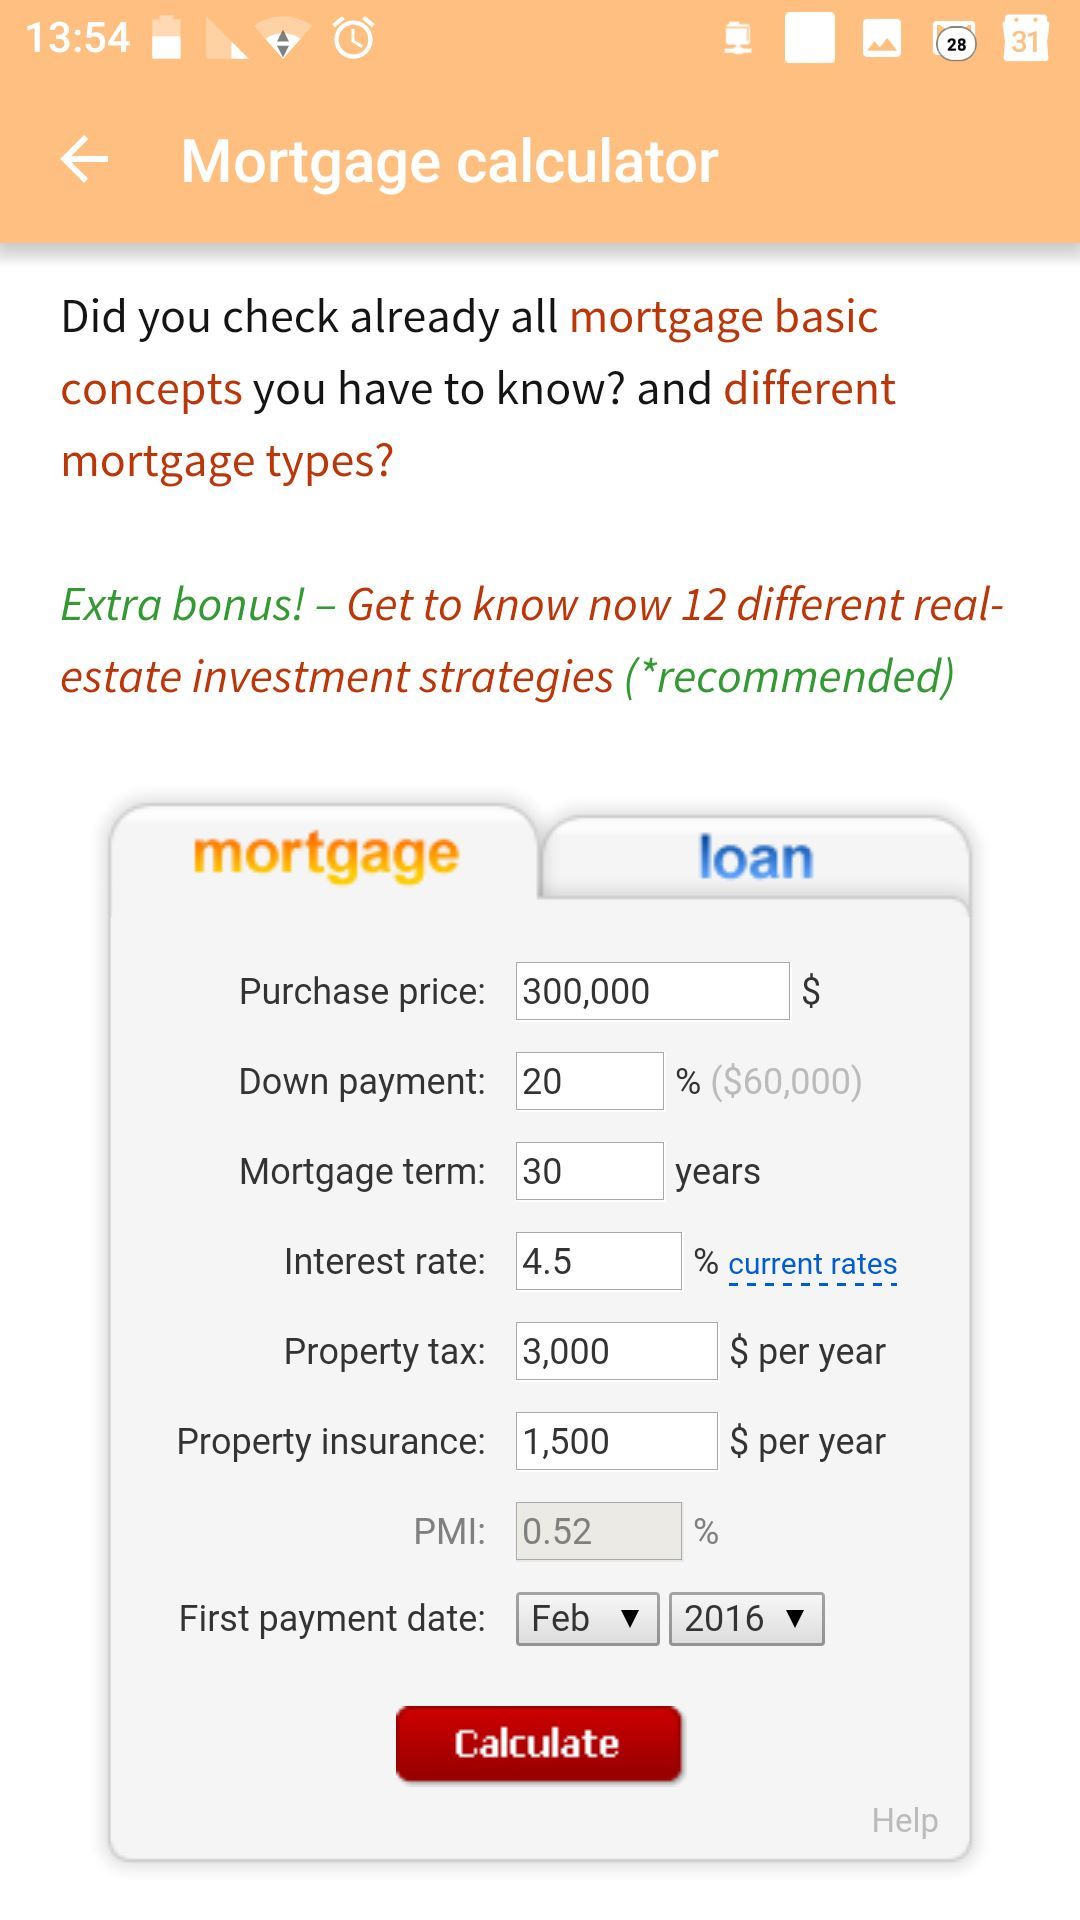 Mortgage calculator & Mortgage loans mini-course - learn about loan rates, mortgage refinance, mortgage calculator and Save money!